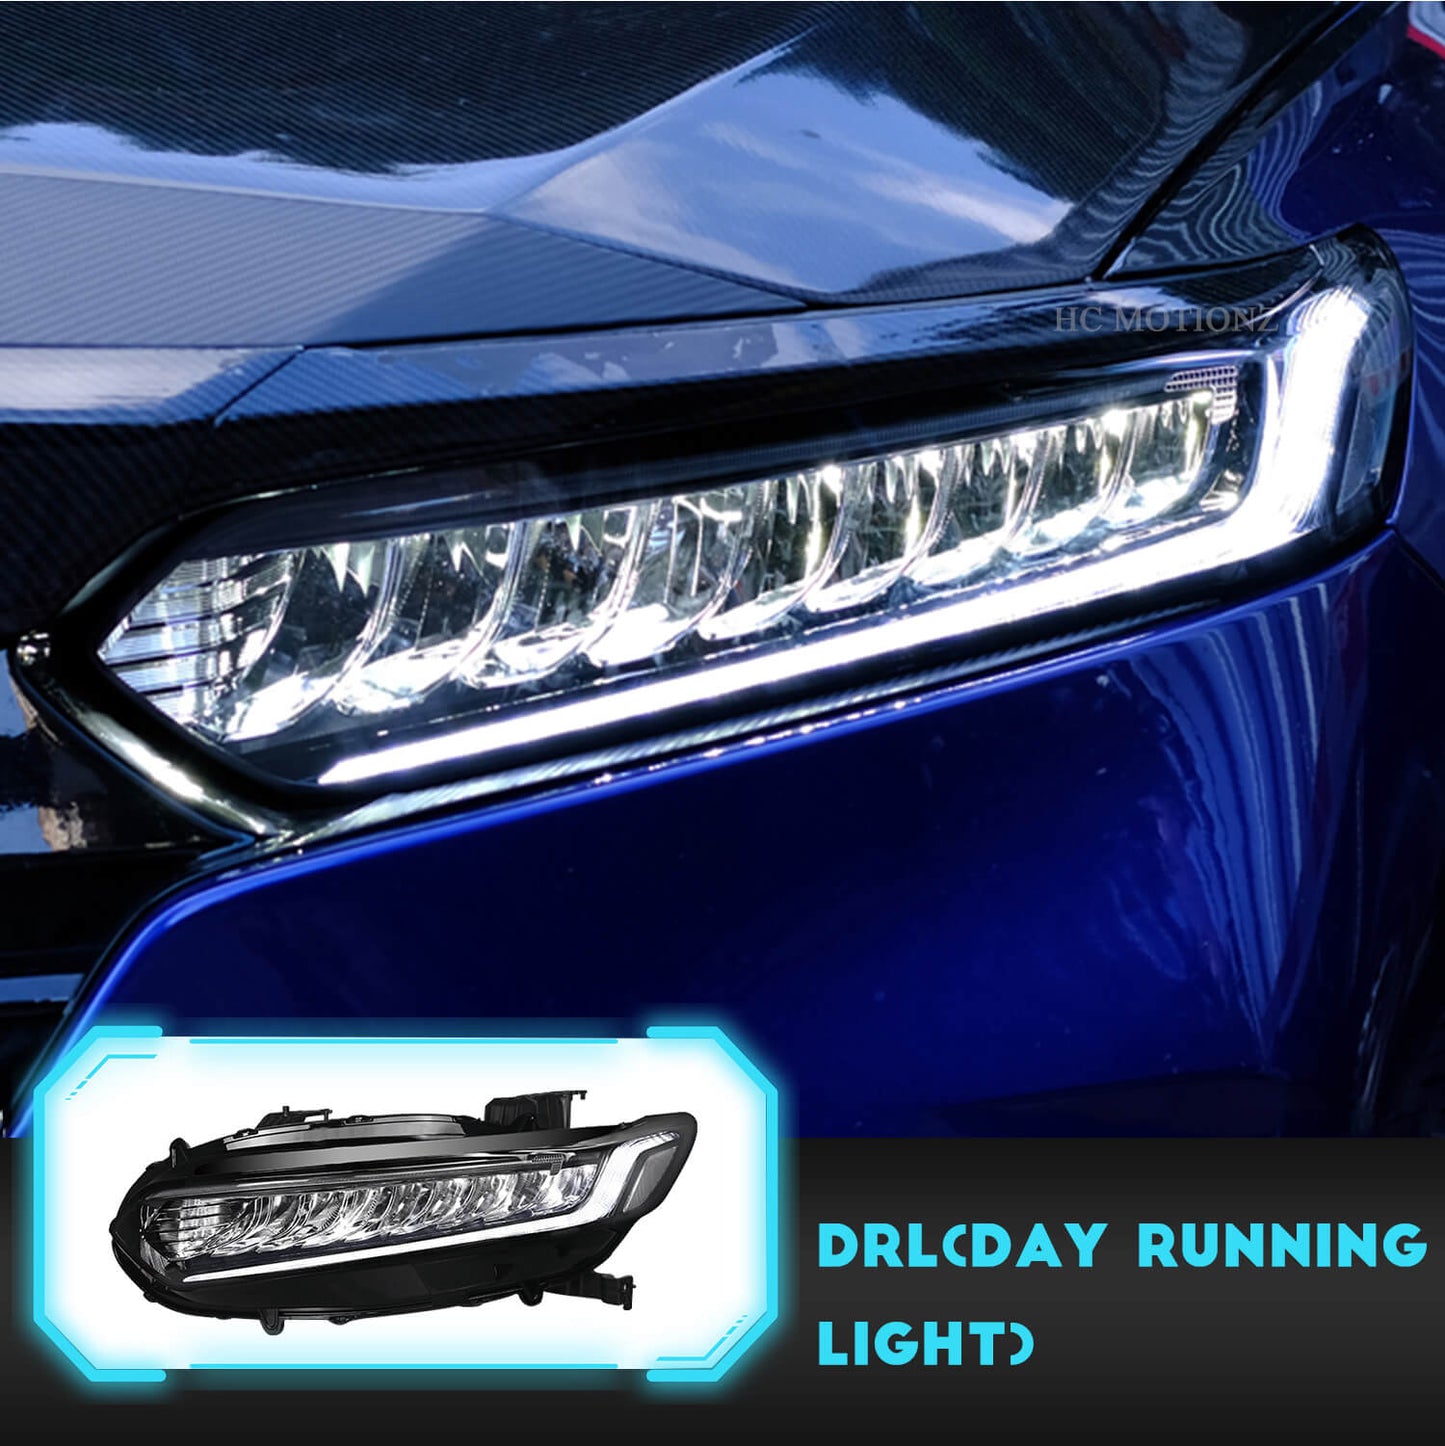 HCMOTION LED Headlights For Honda Accord 2018 to 2021